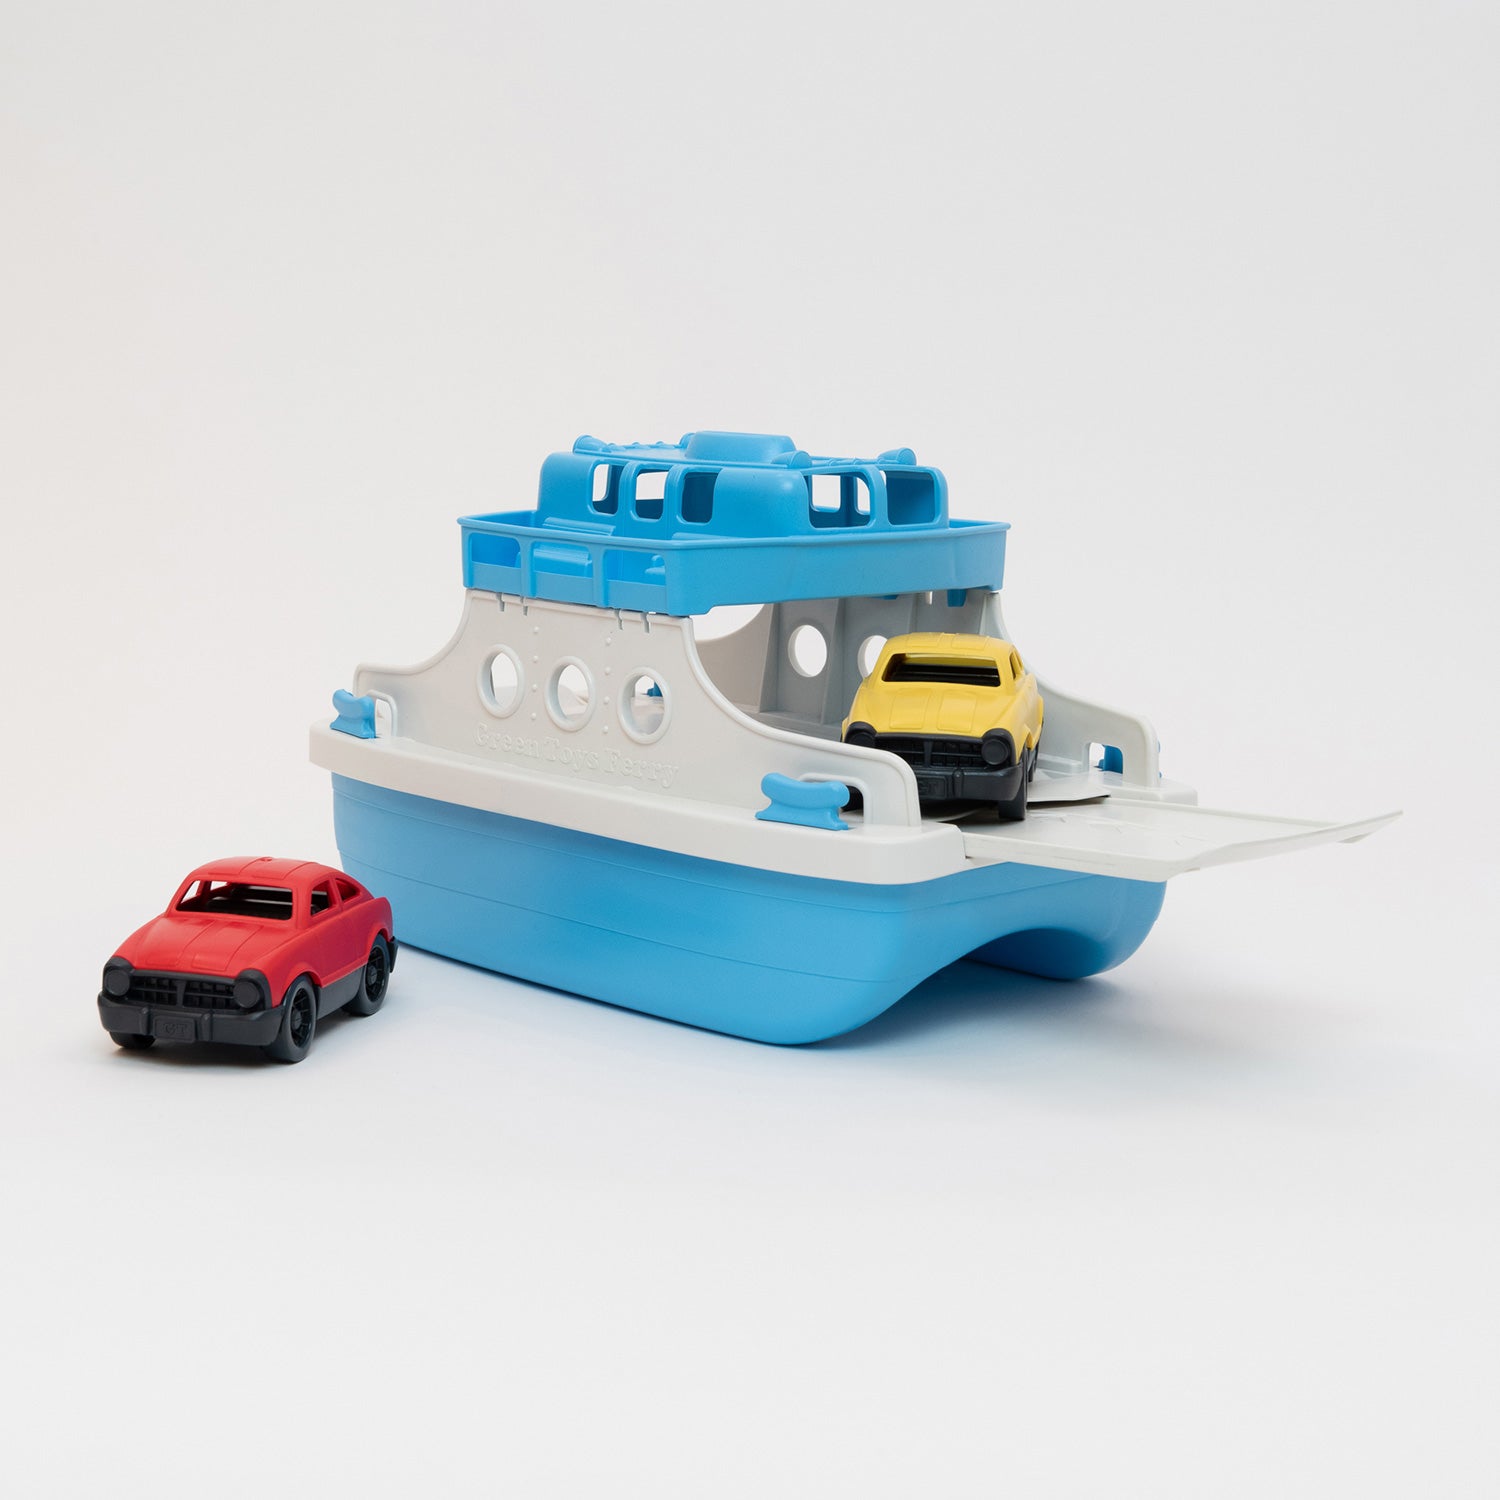 A photo of a toy white and blue ferry with yellow and red cars, pictured on a white background.